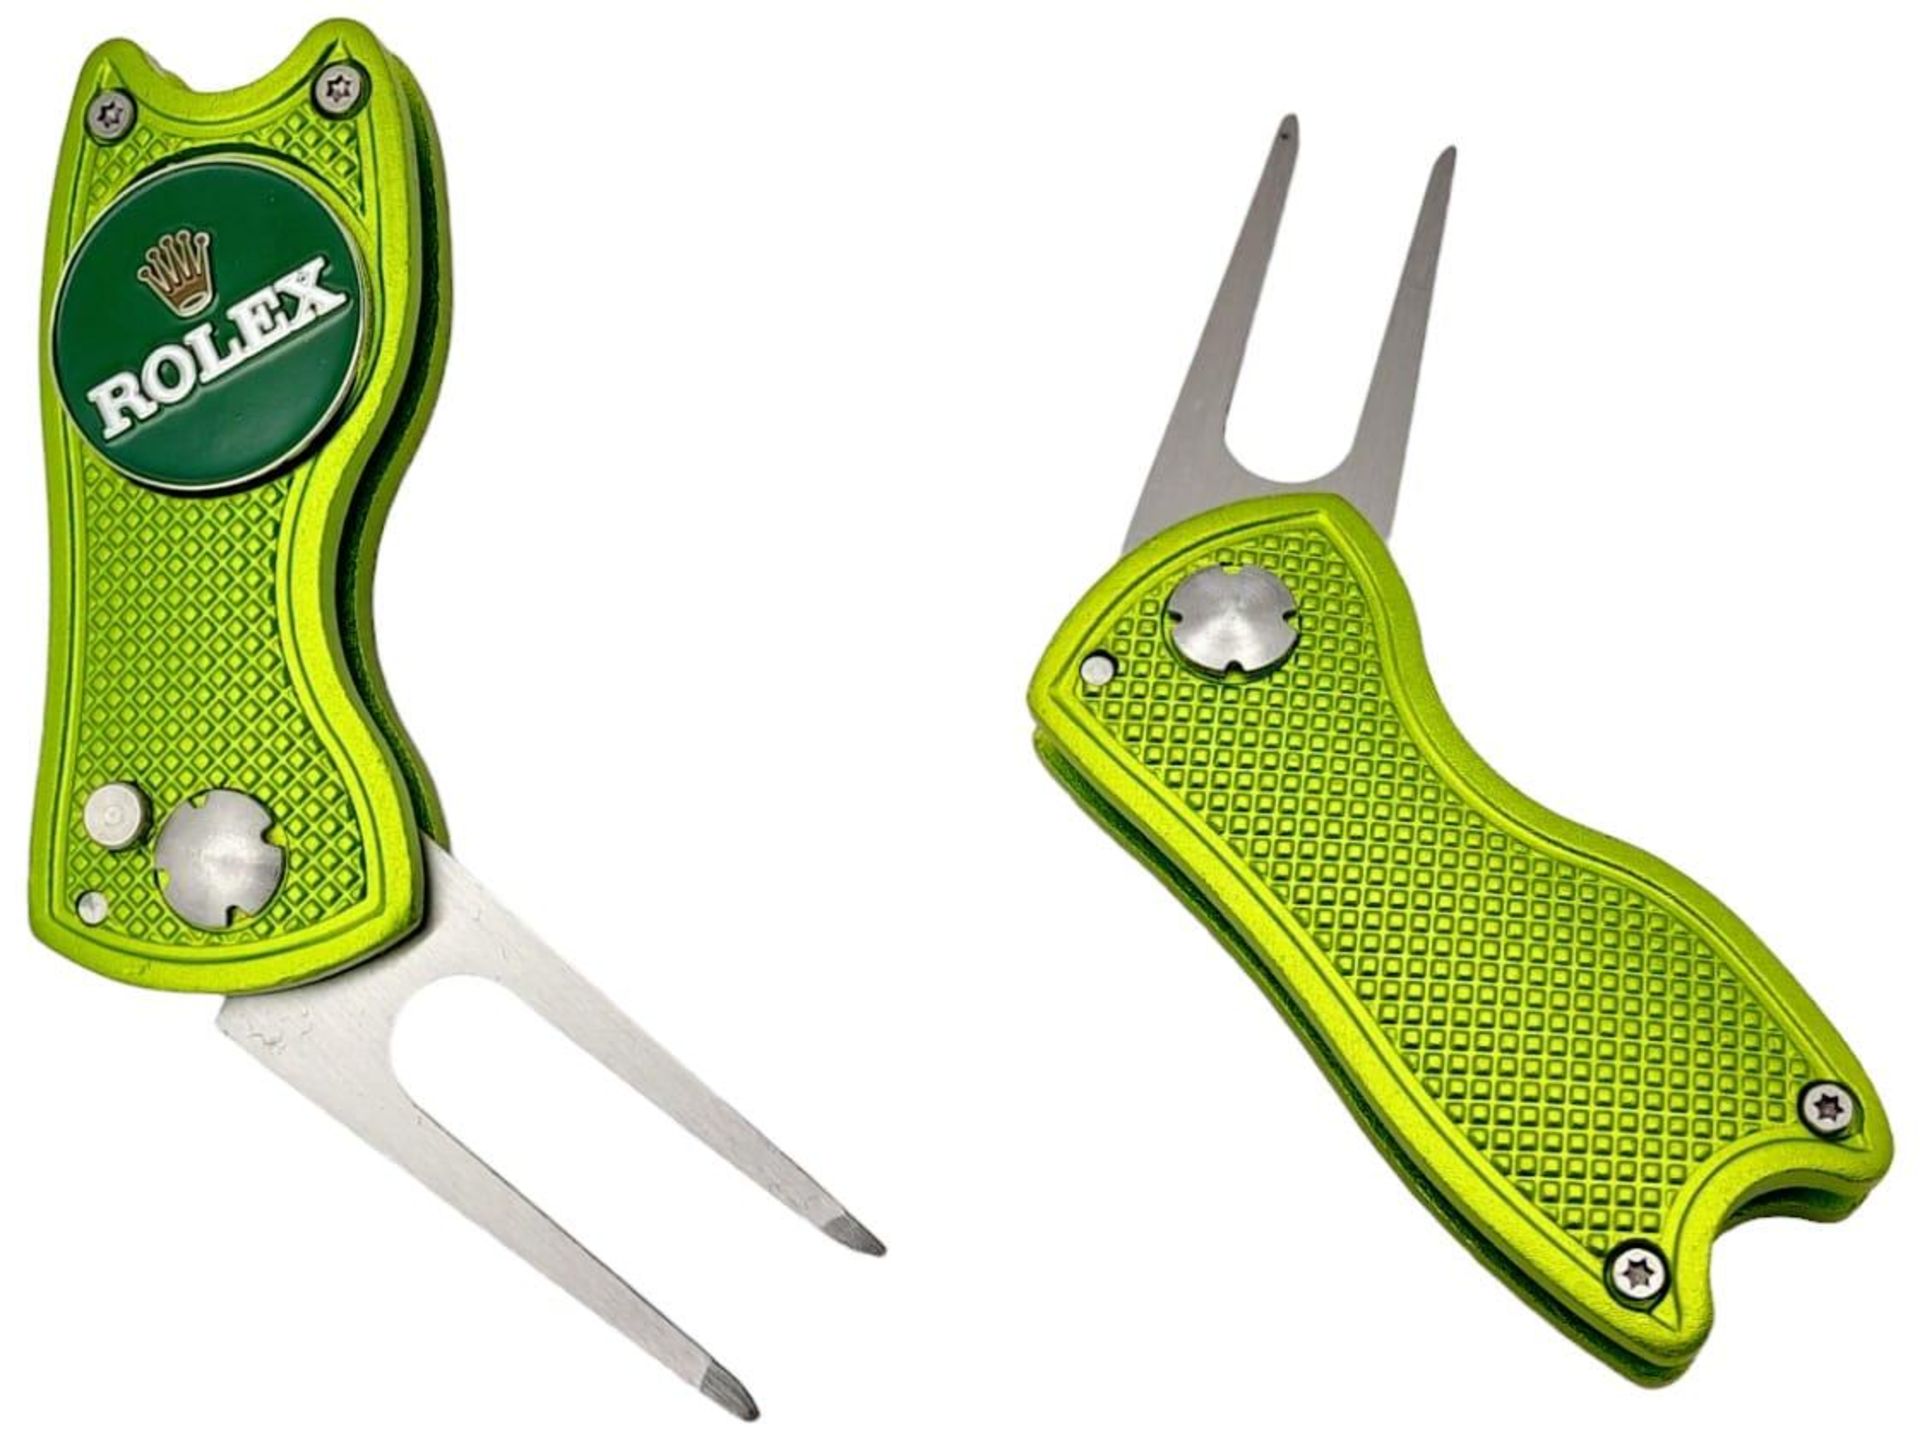 A Rolex Branded Golf Putting Green Divot Repair Tool with Removable Rolex Branded Ball Markers. - Bild 3 aus 5